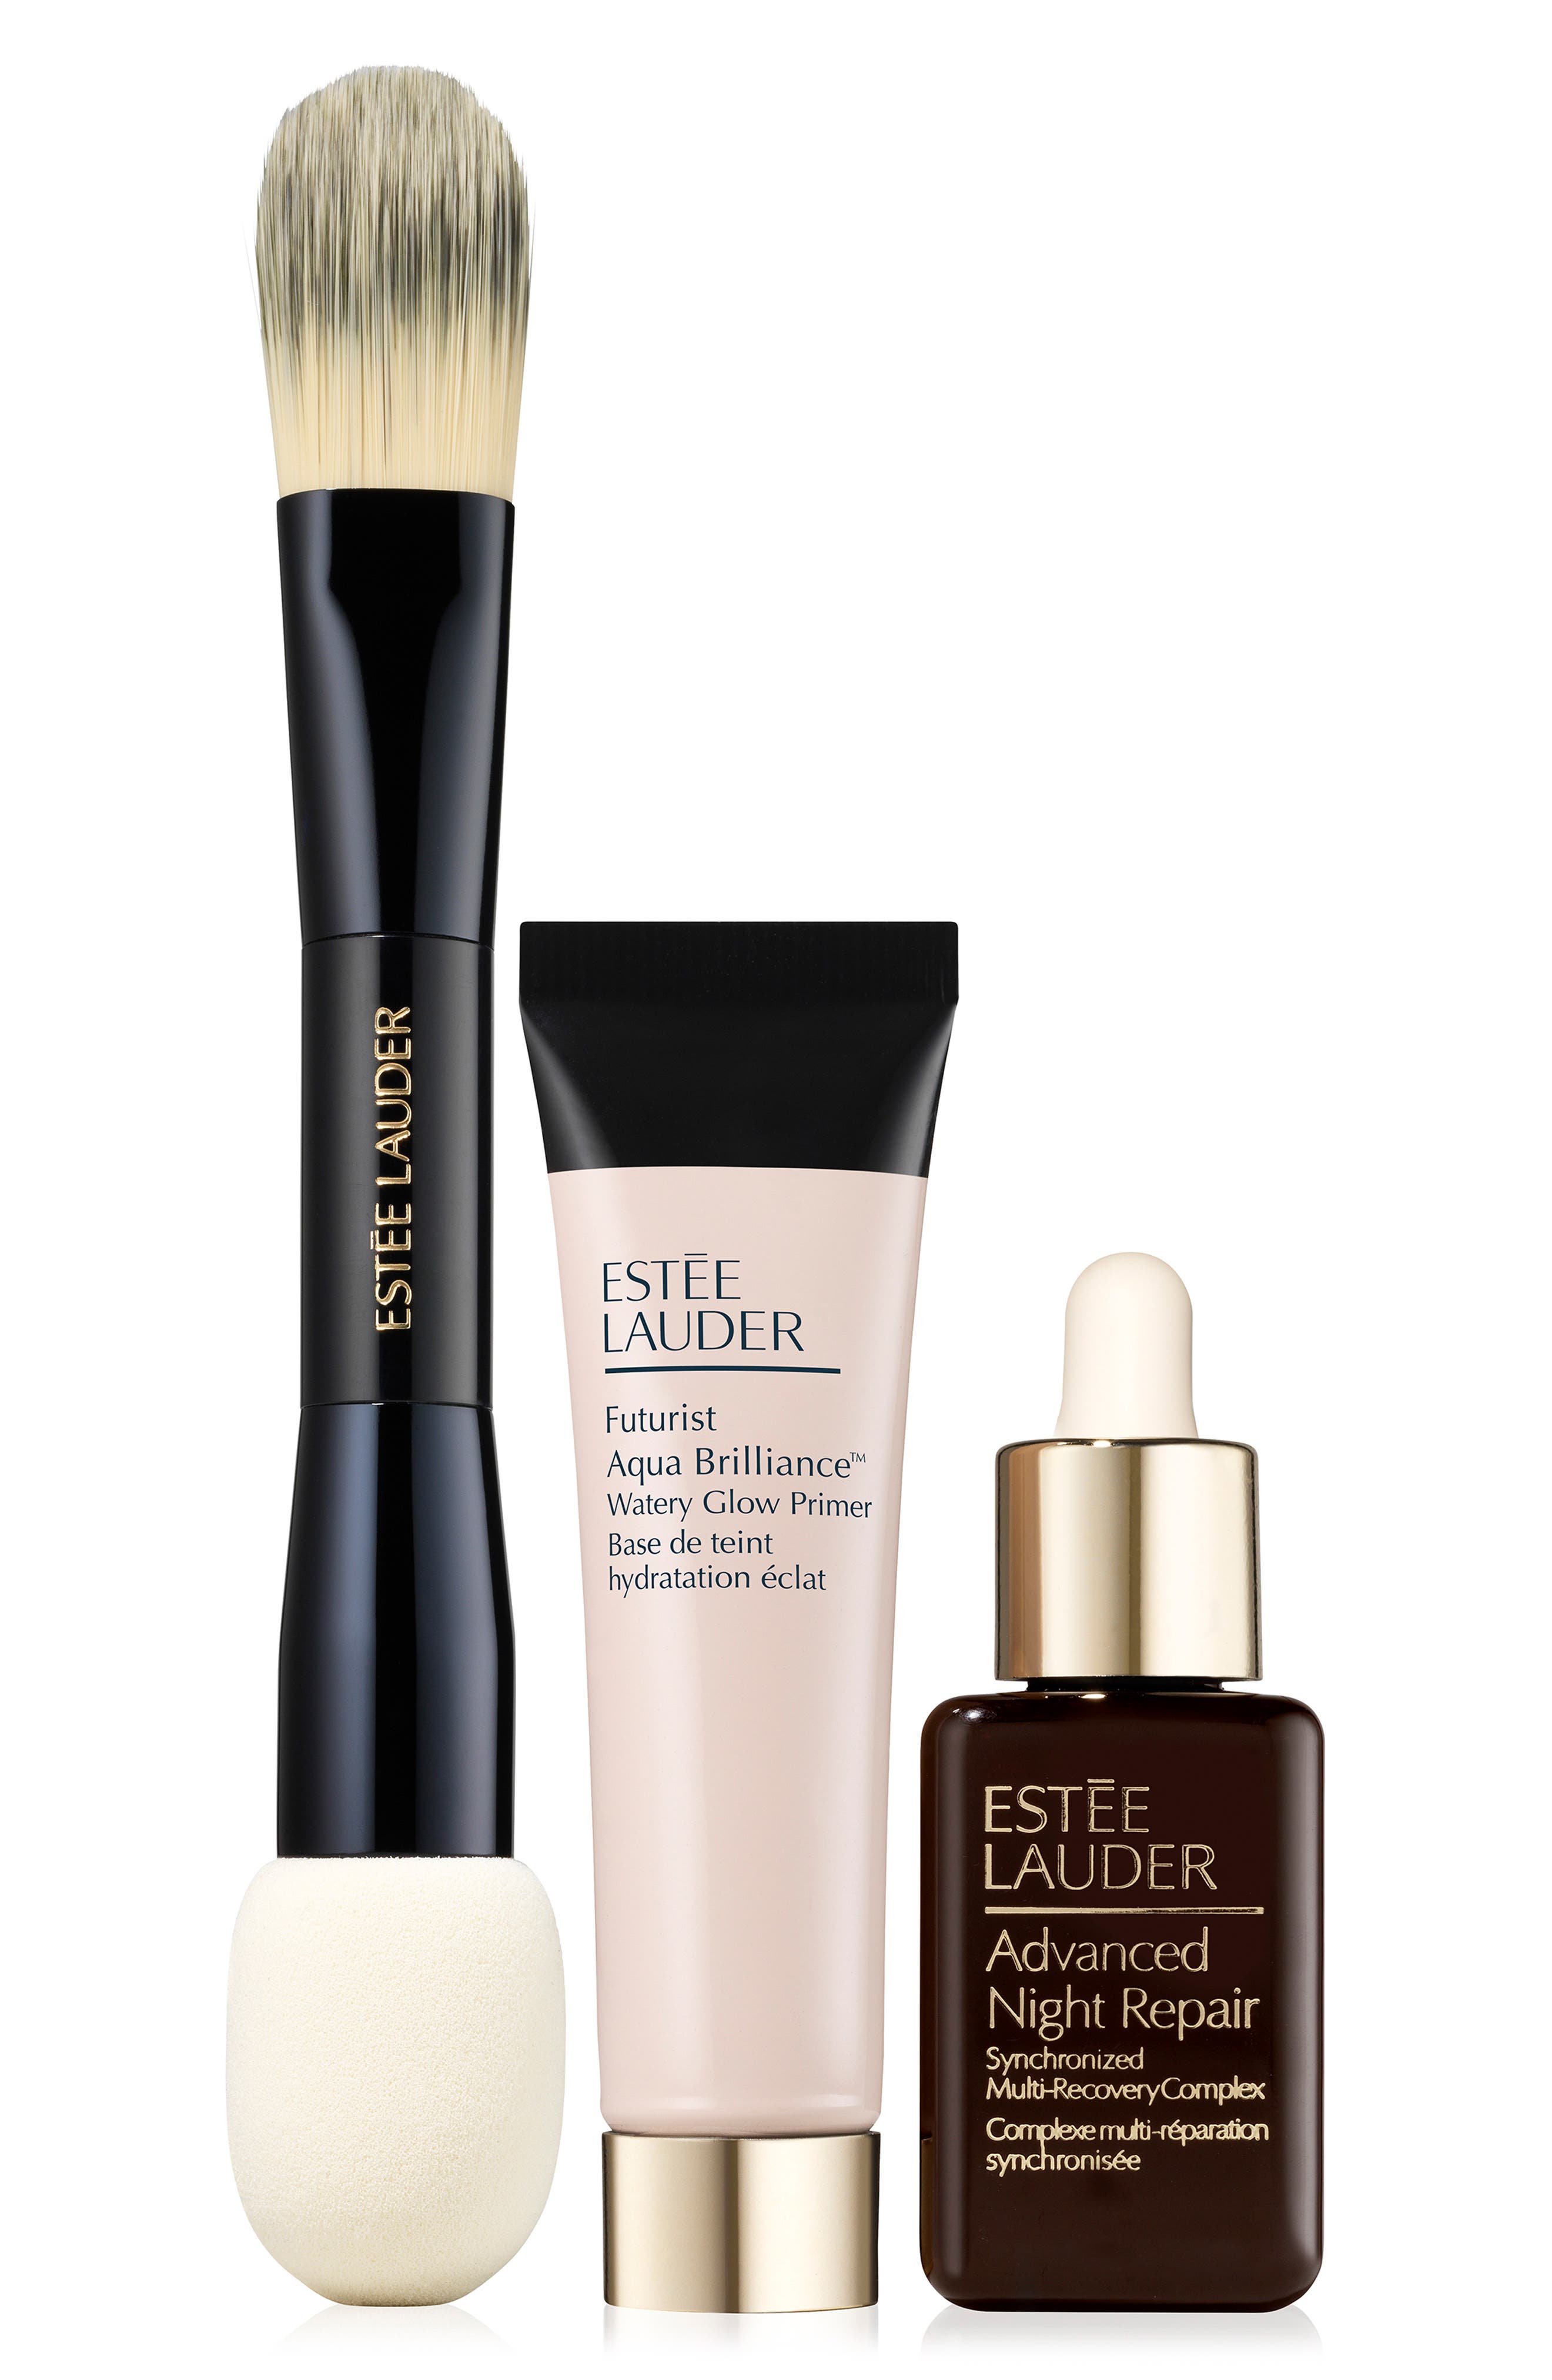 UPC 887167584525 product image for Estee Lauder Meet Your Match Double Wear Makeup Set at Nordstrom | upcitemdb.com